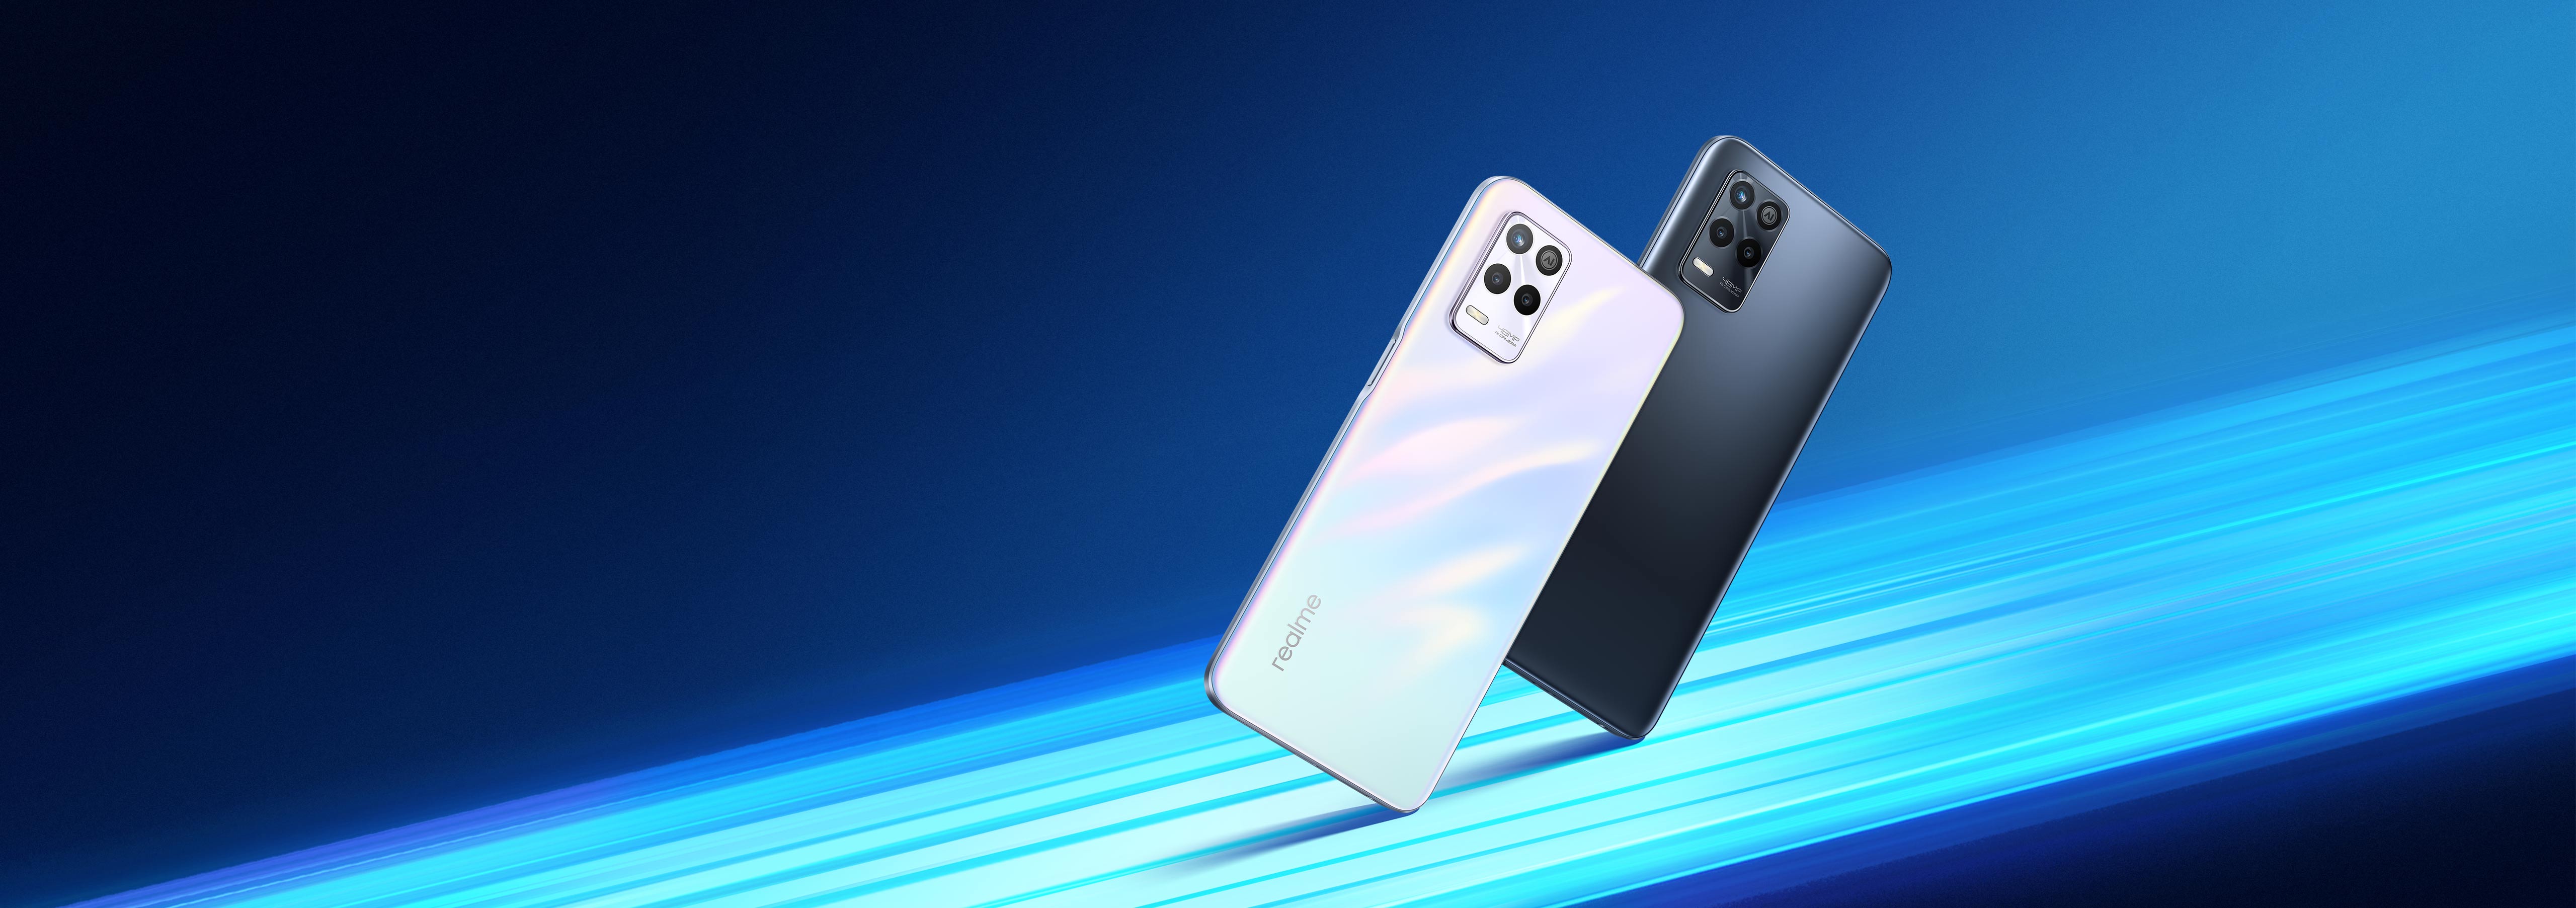 realme Emerges as Fastest-growing Major* 5G Brand Globally in Q4 2021